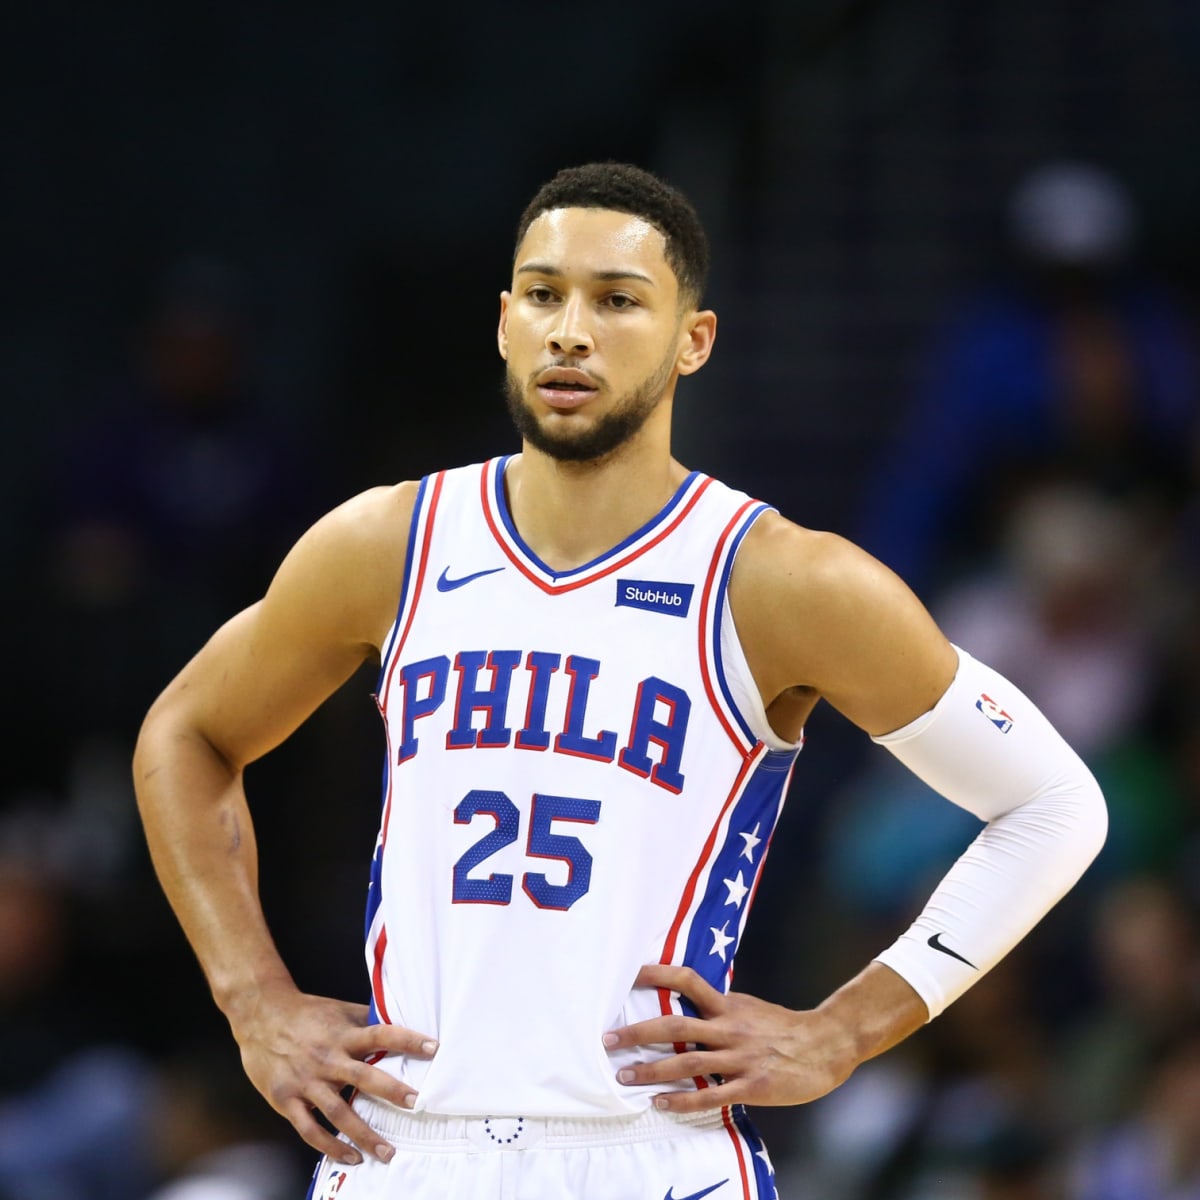 Let's speculate: what are Allen Iverson, Ben Simmons and Sixers